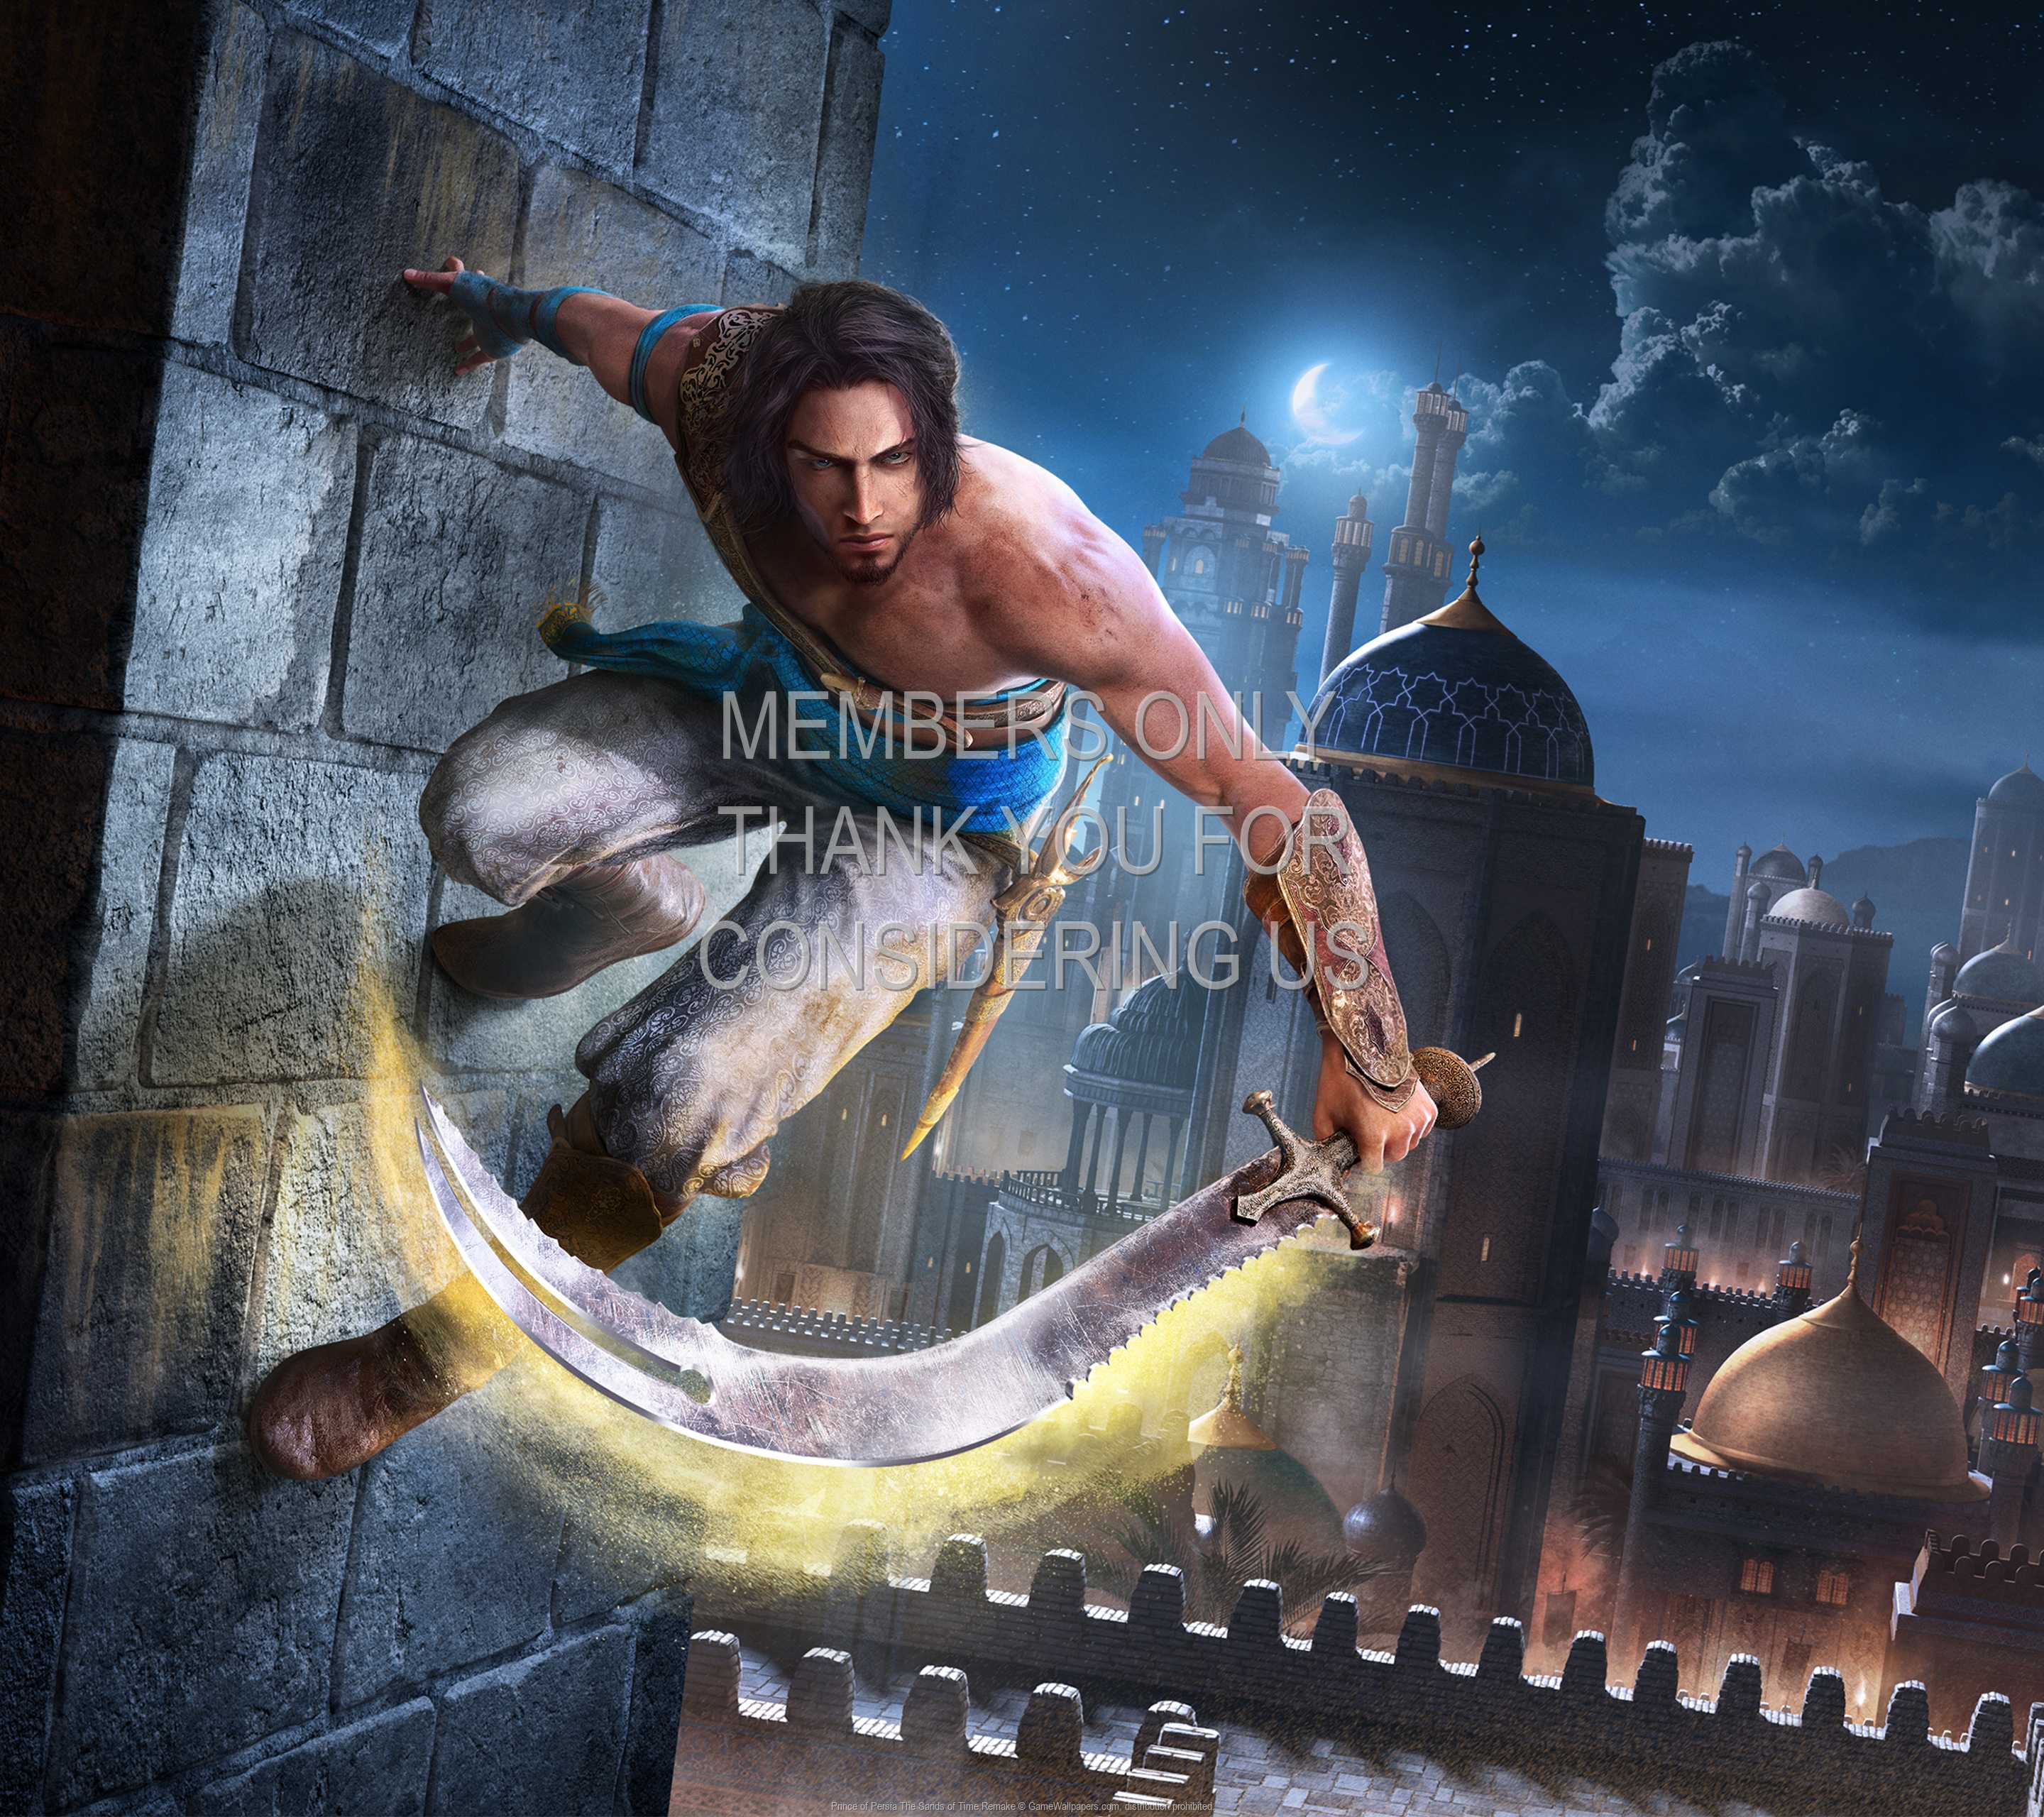 Prince of Persia: The Sands of Time Remake 1440p Horizontal Mobile fond d'cran 01